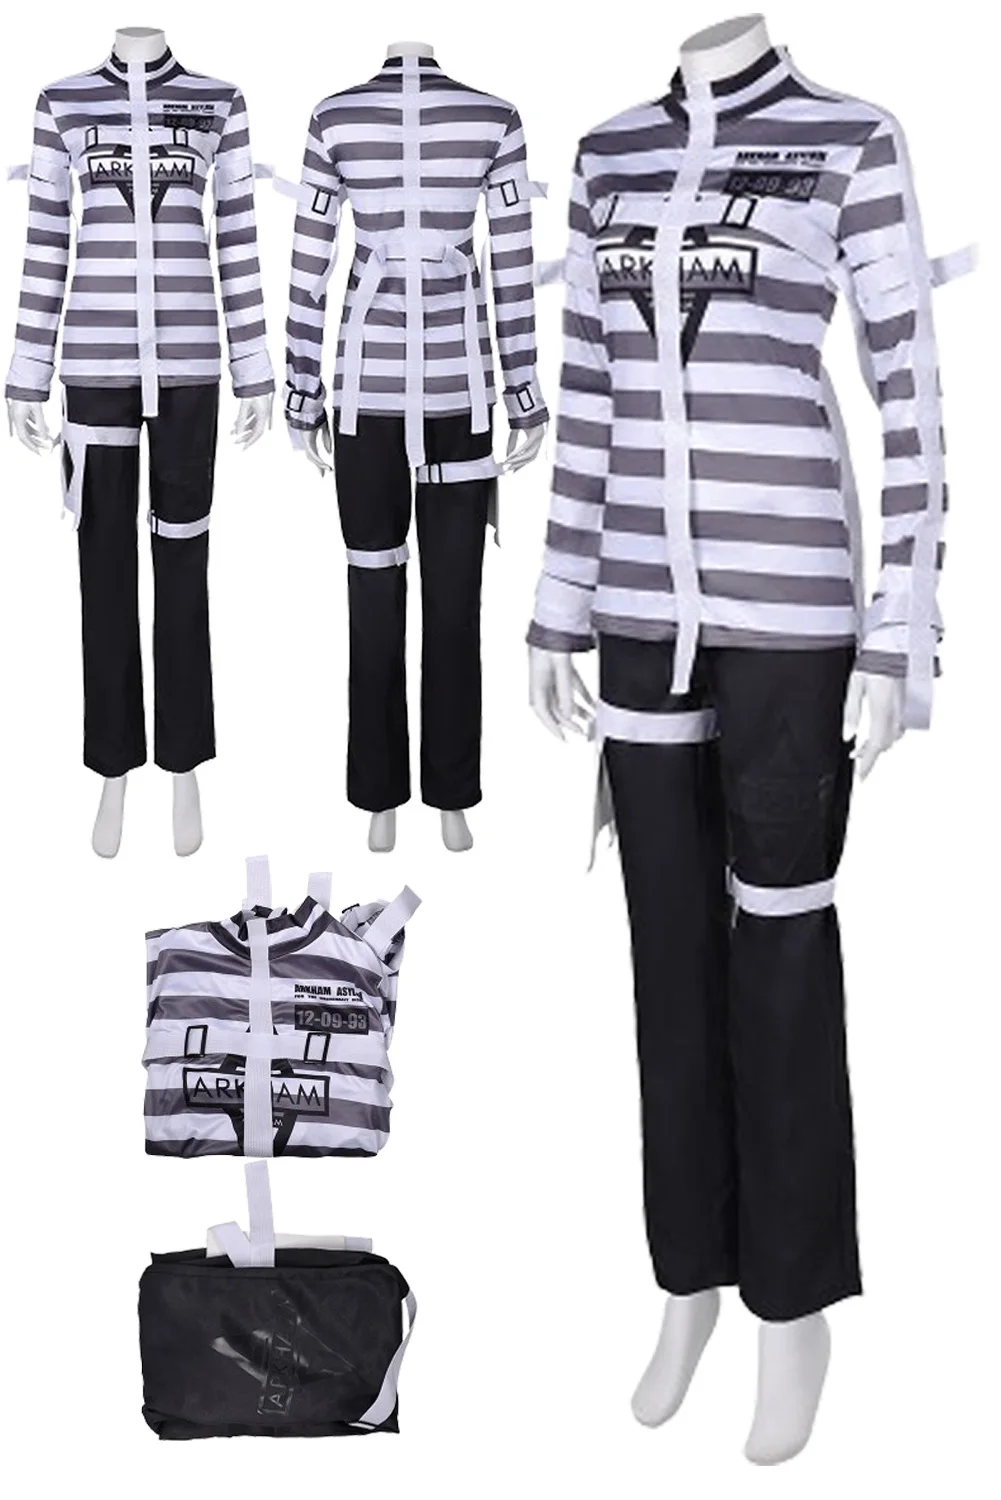 

Women Quinzel Cosplay Fancy Jacket Costume Female Super Villain Disguise Stripe Clothes Female Halloween Roleplay Fantasy Suit